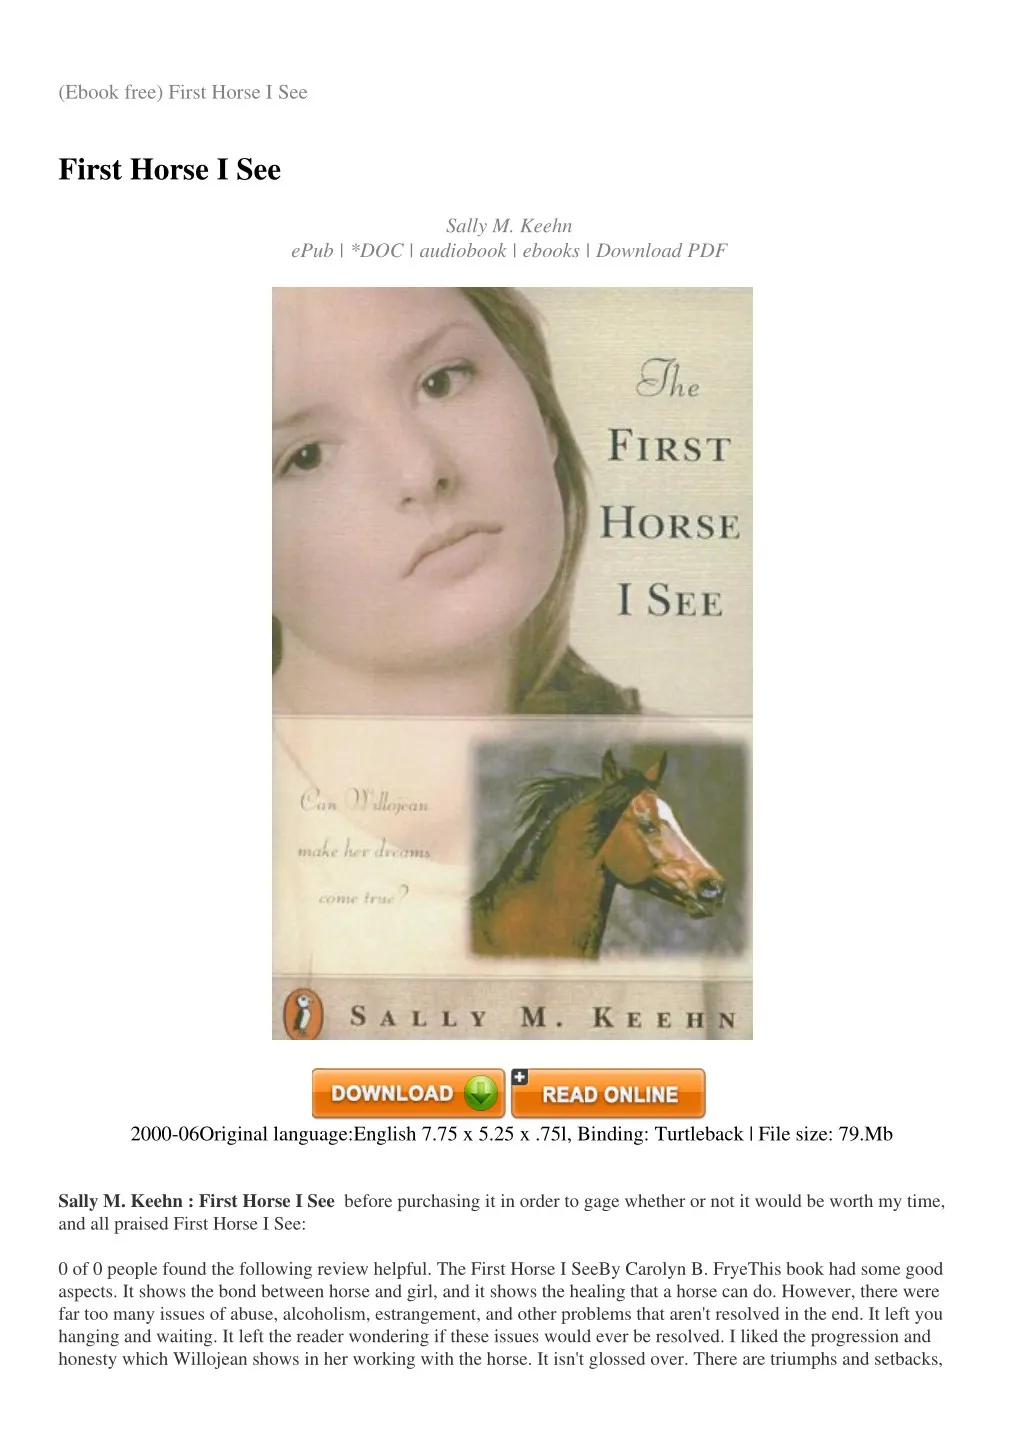 ebook free first horse i see